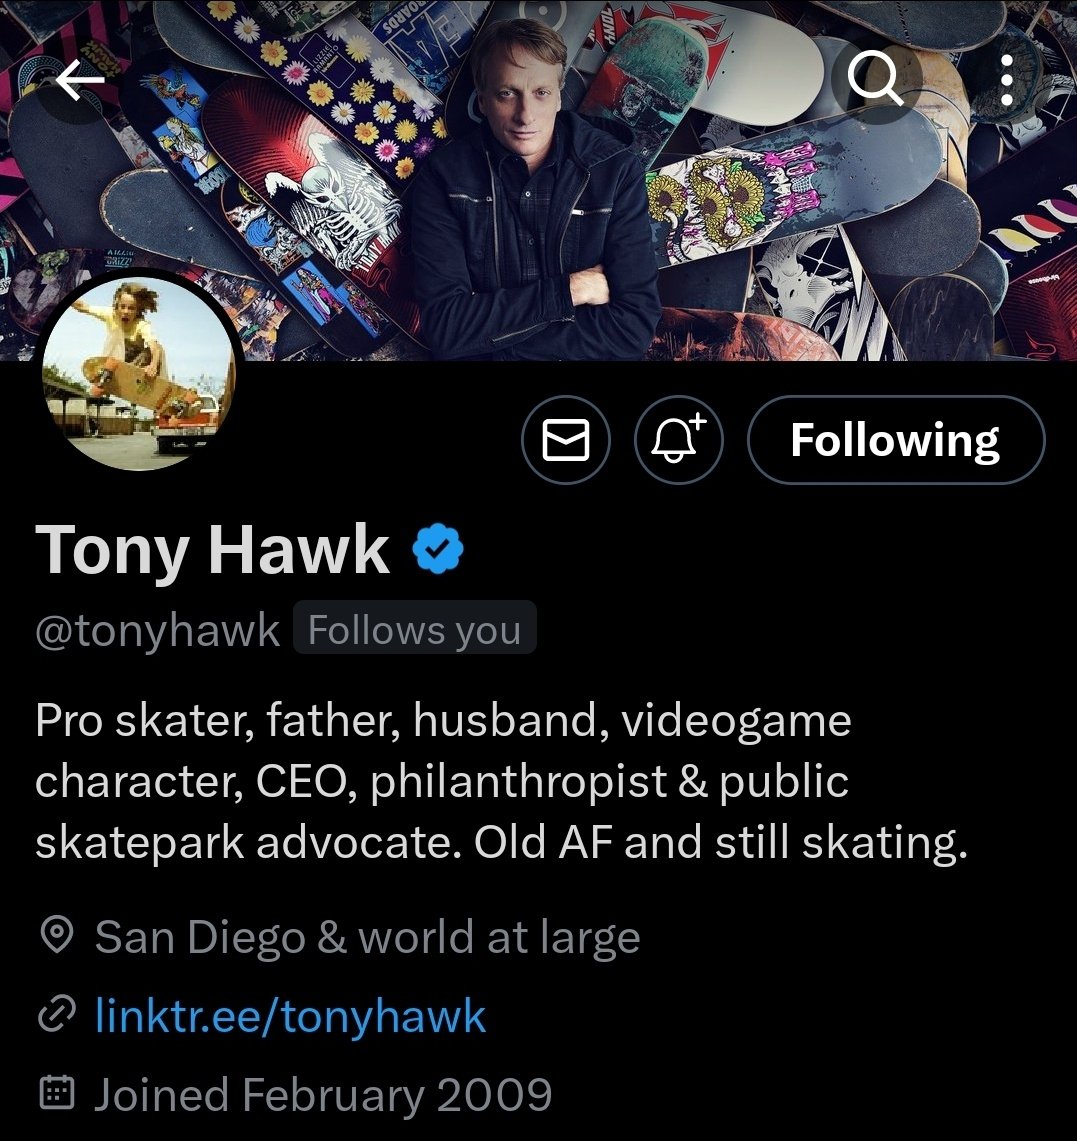 every day I am motivated and inspired by the fact that Tony Hawk follows me on Twitter